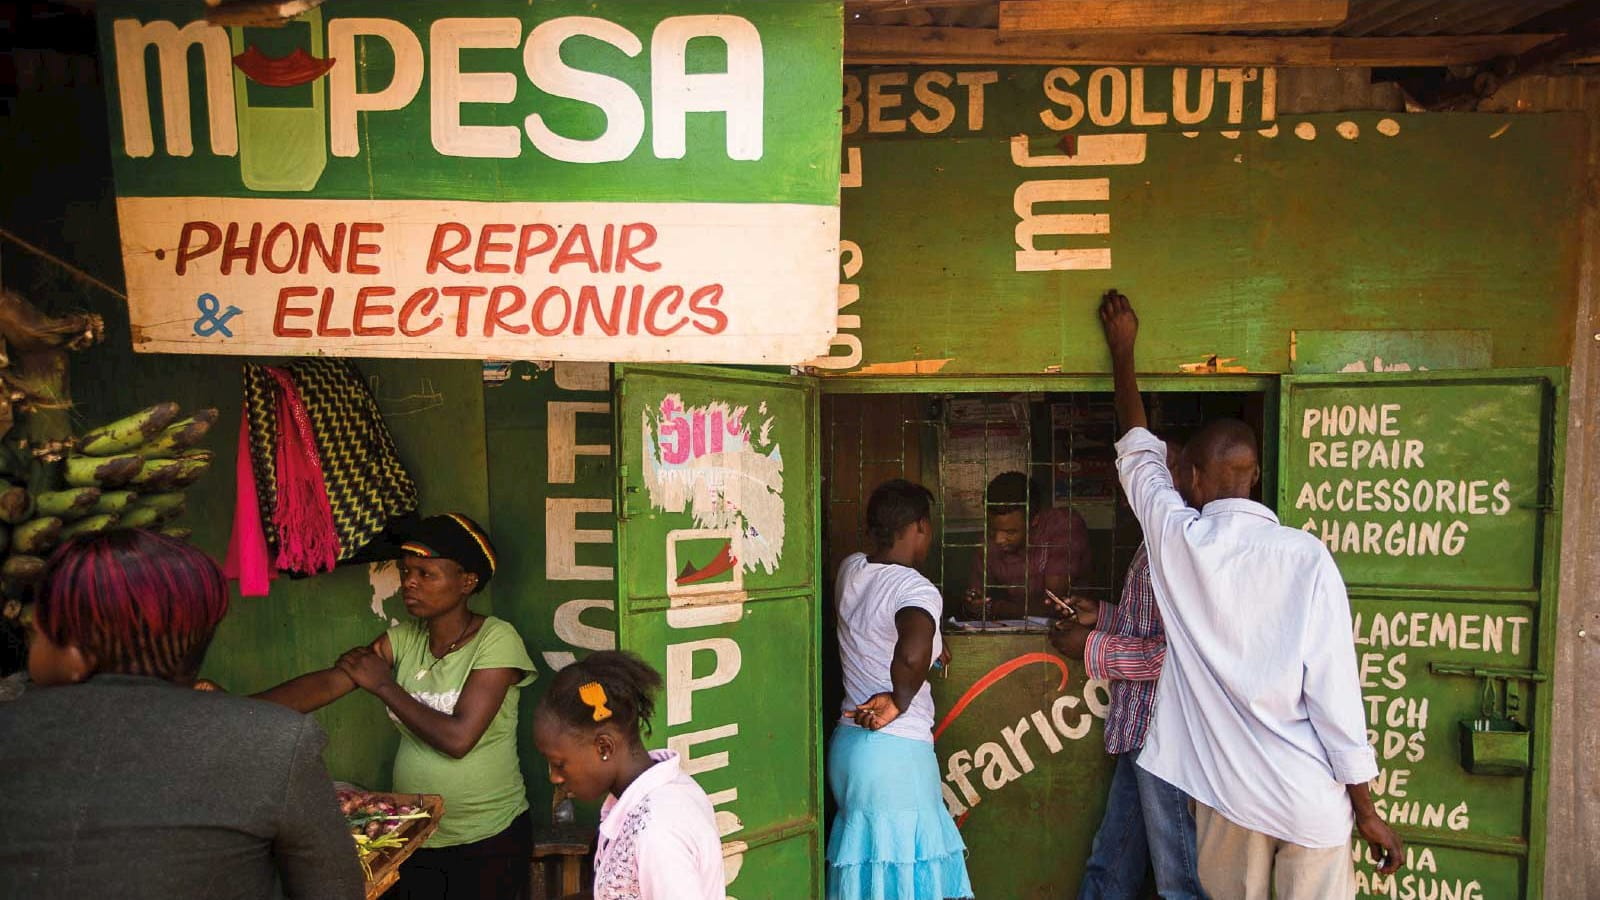 The front of a phone repair and electronics shop